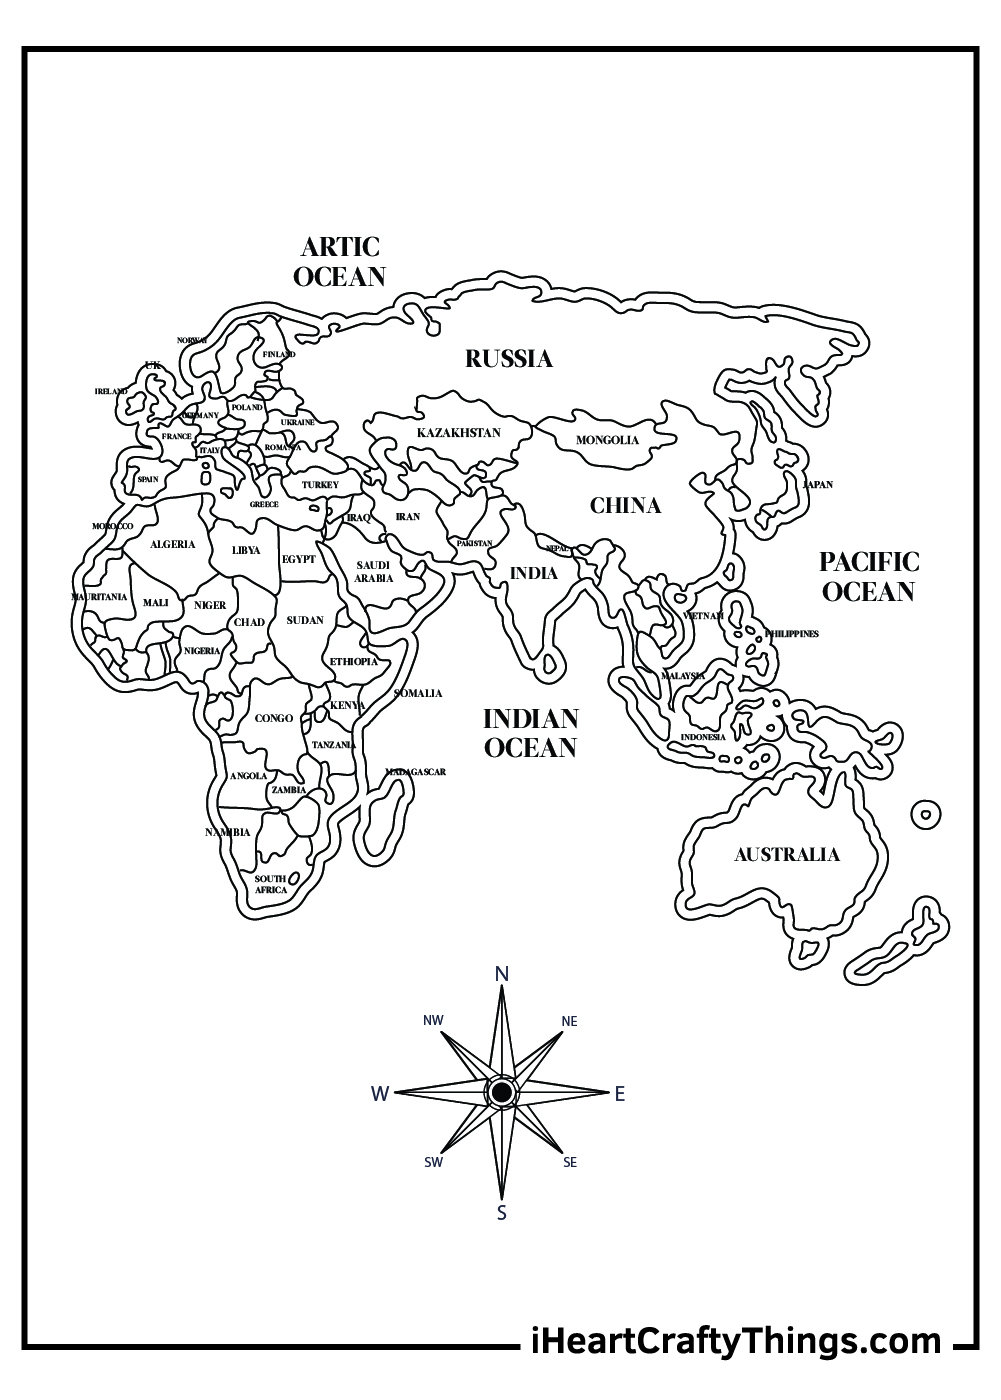 Europe and Asia maps coloring pages printable 